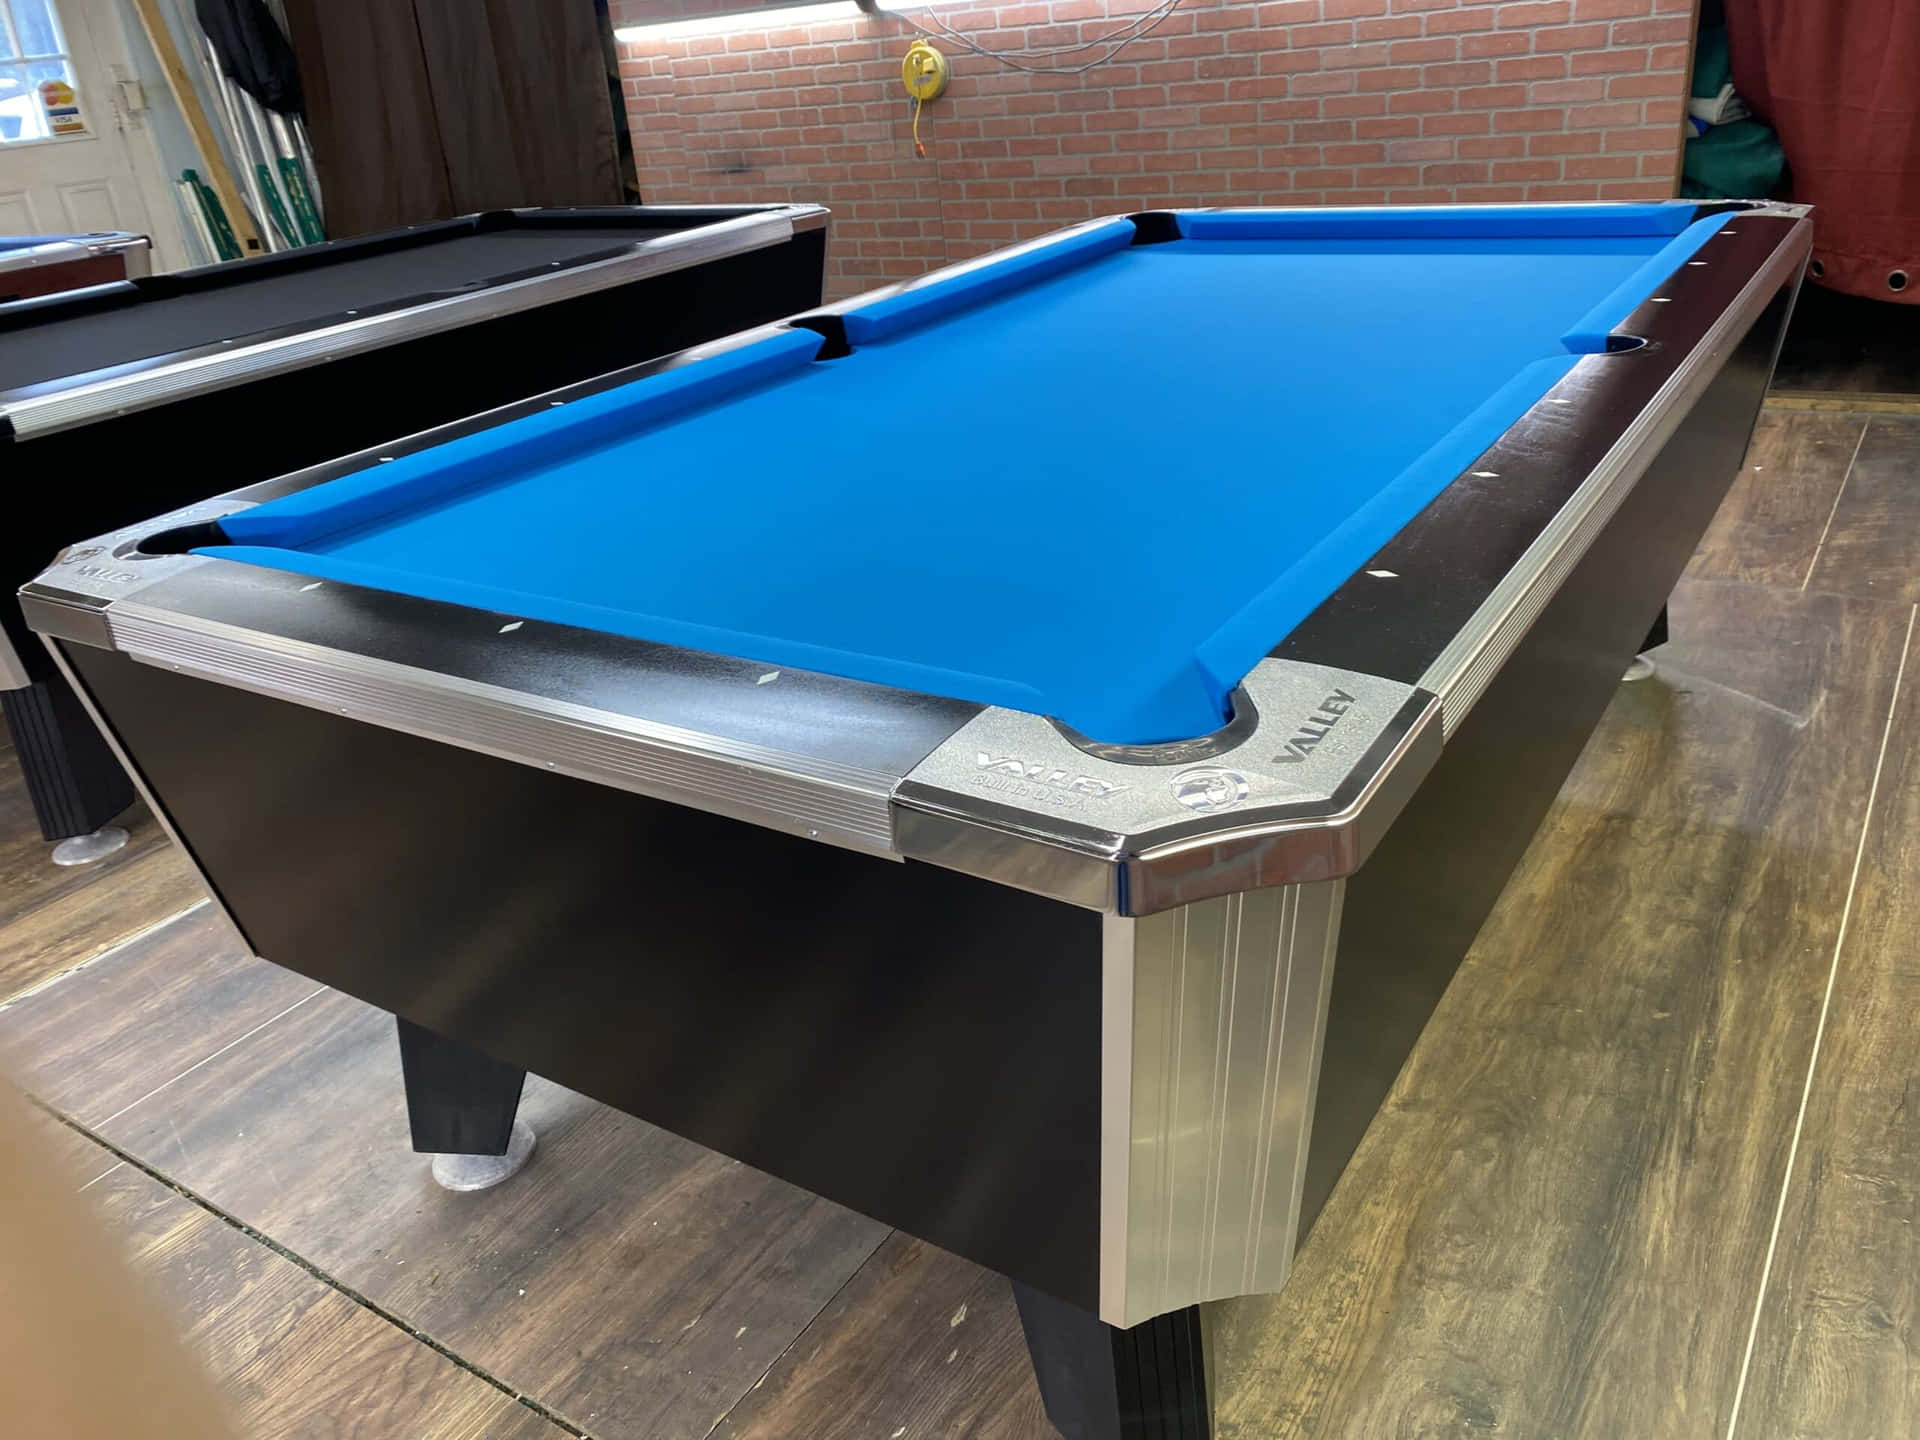 A Pool Table With A Blue Cloth